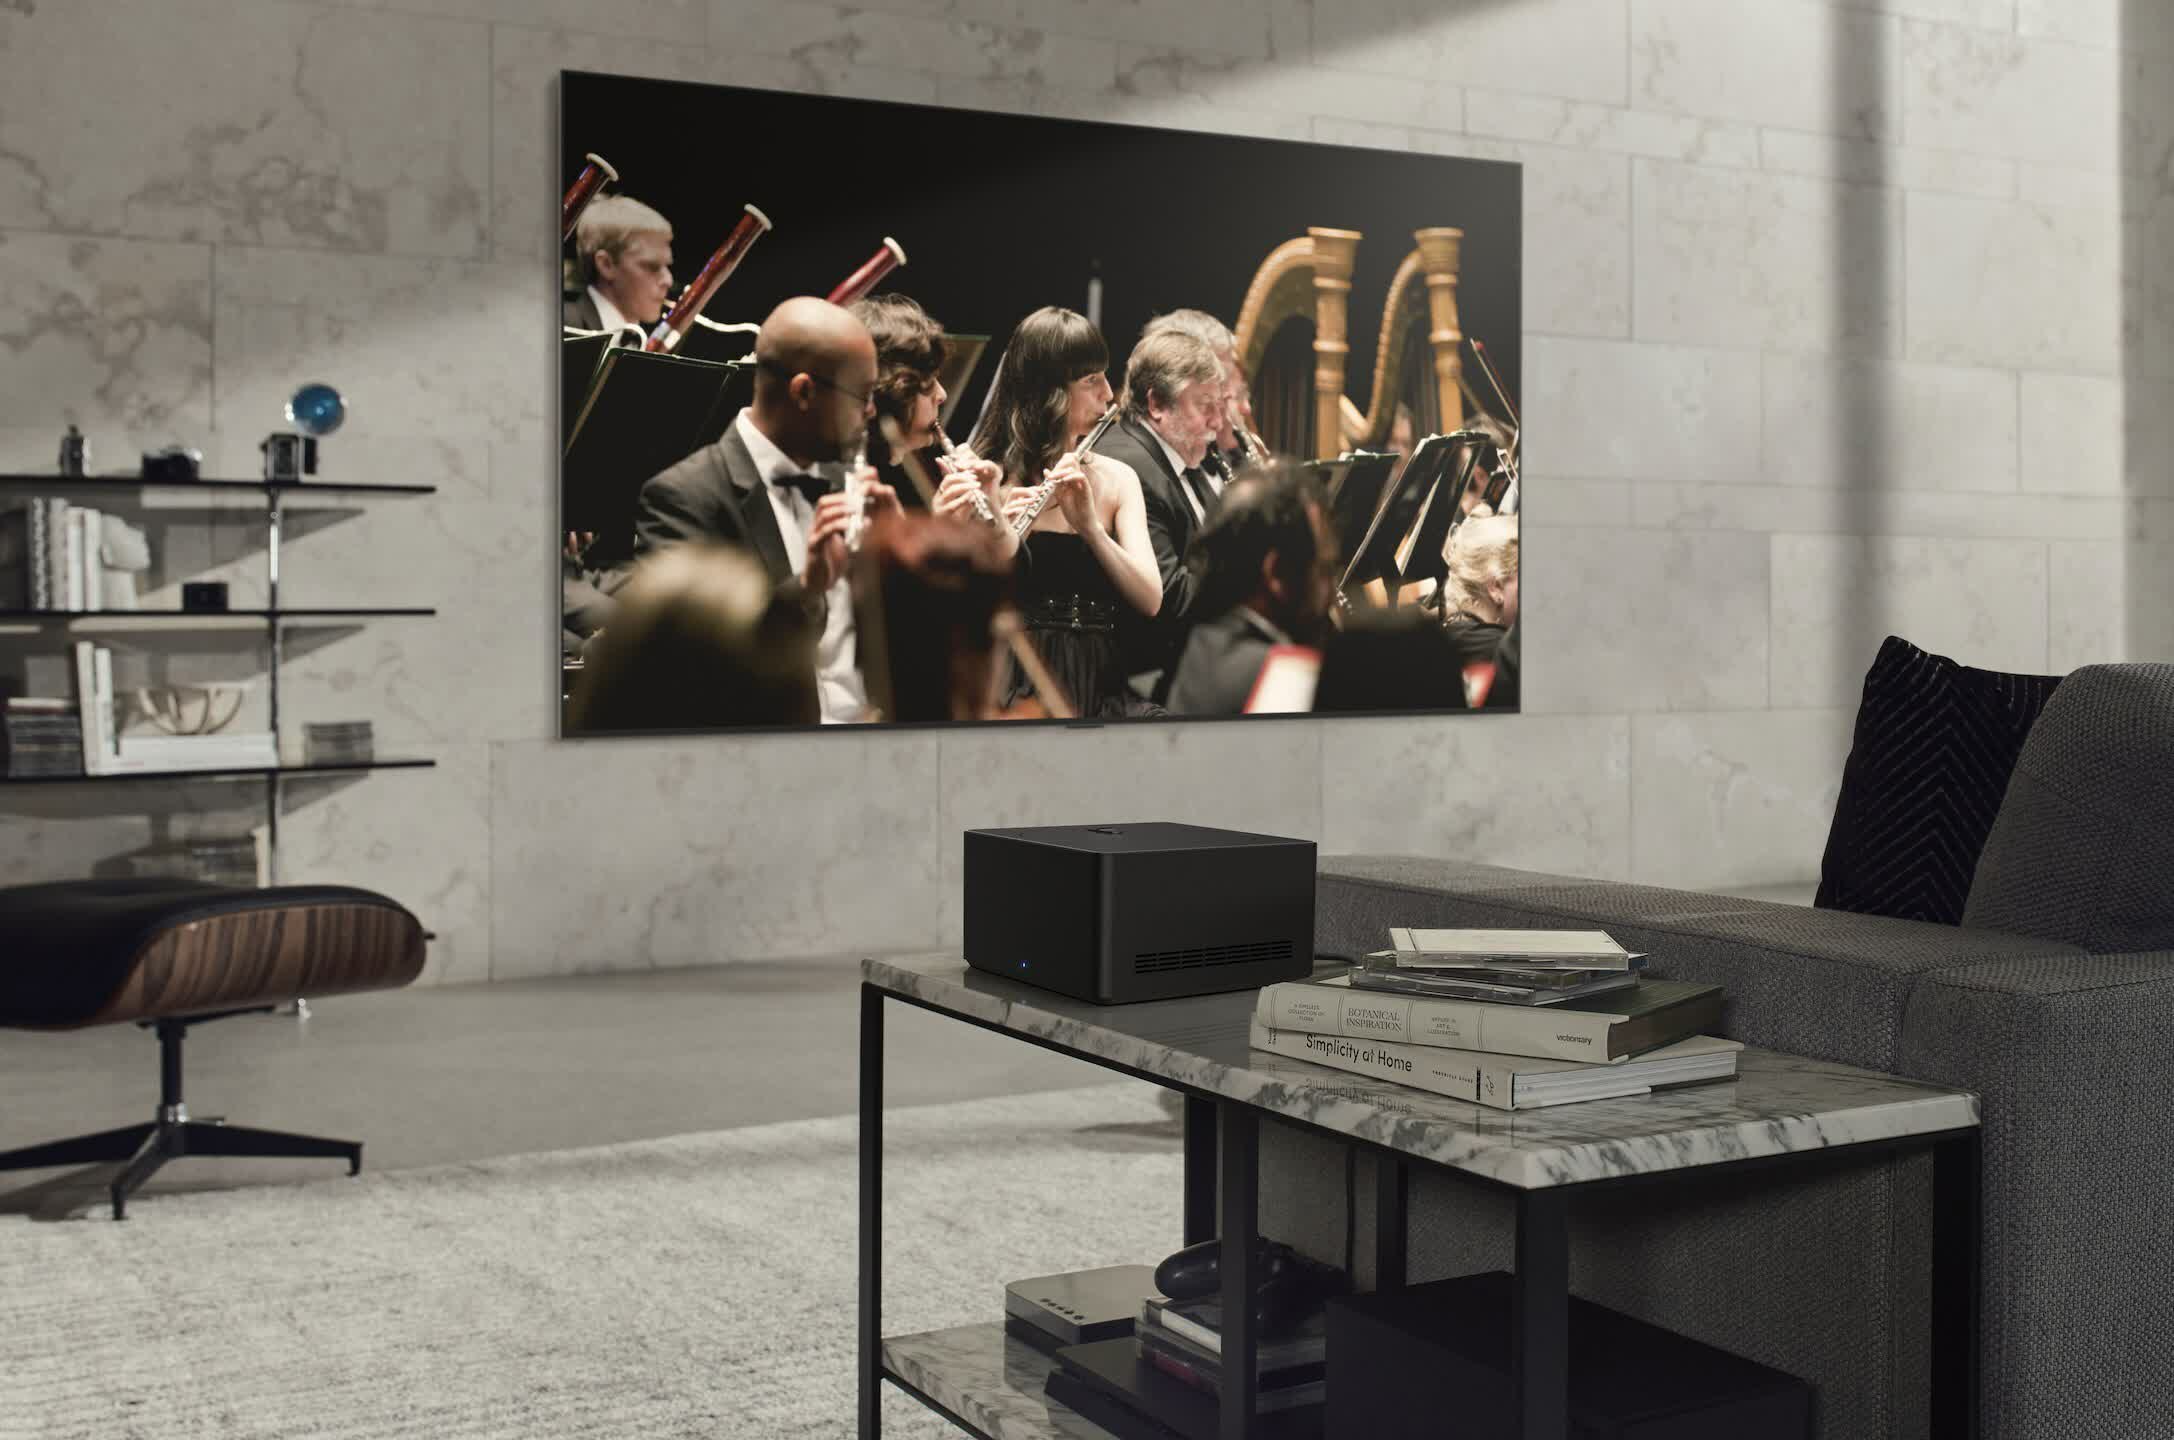 Next-gen TV: LG's 97-inch Signature OLED receives all audio and video signals wirelessly